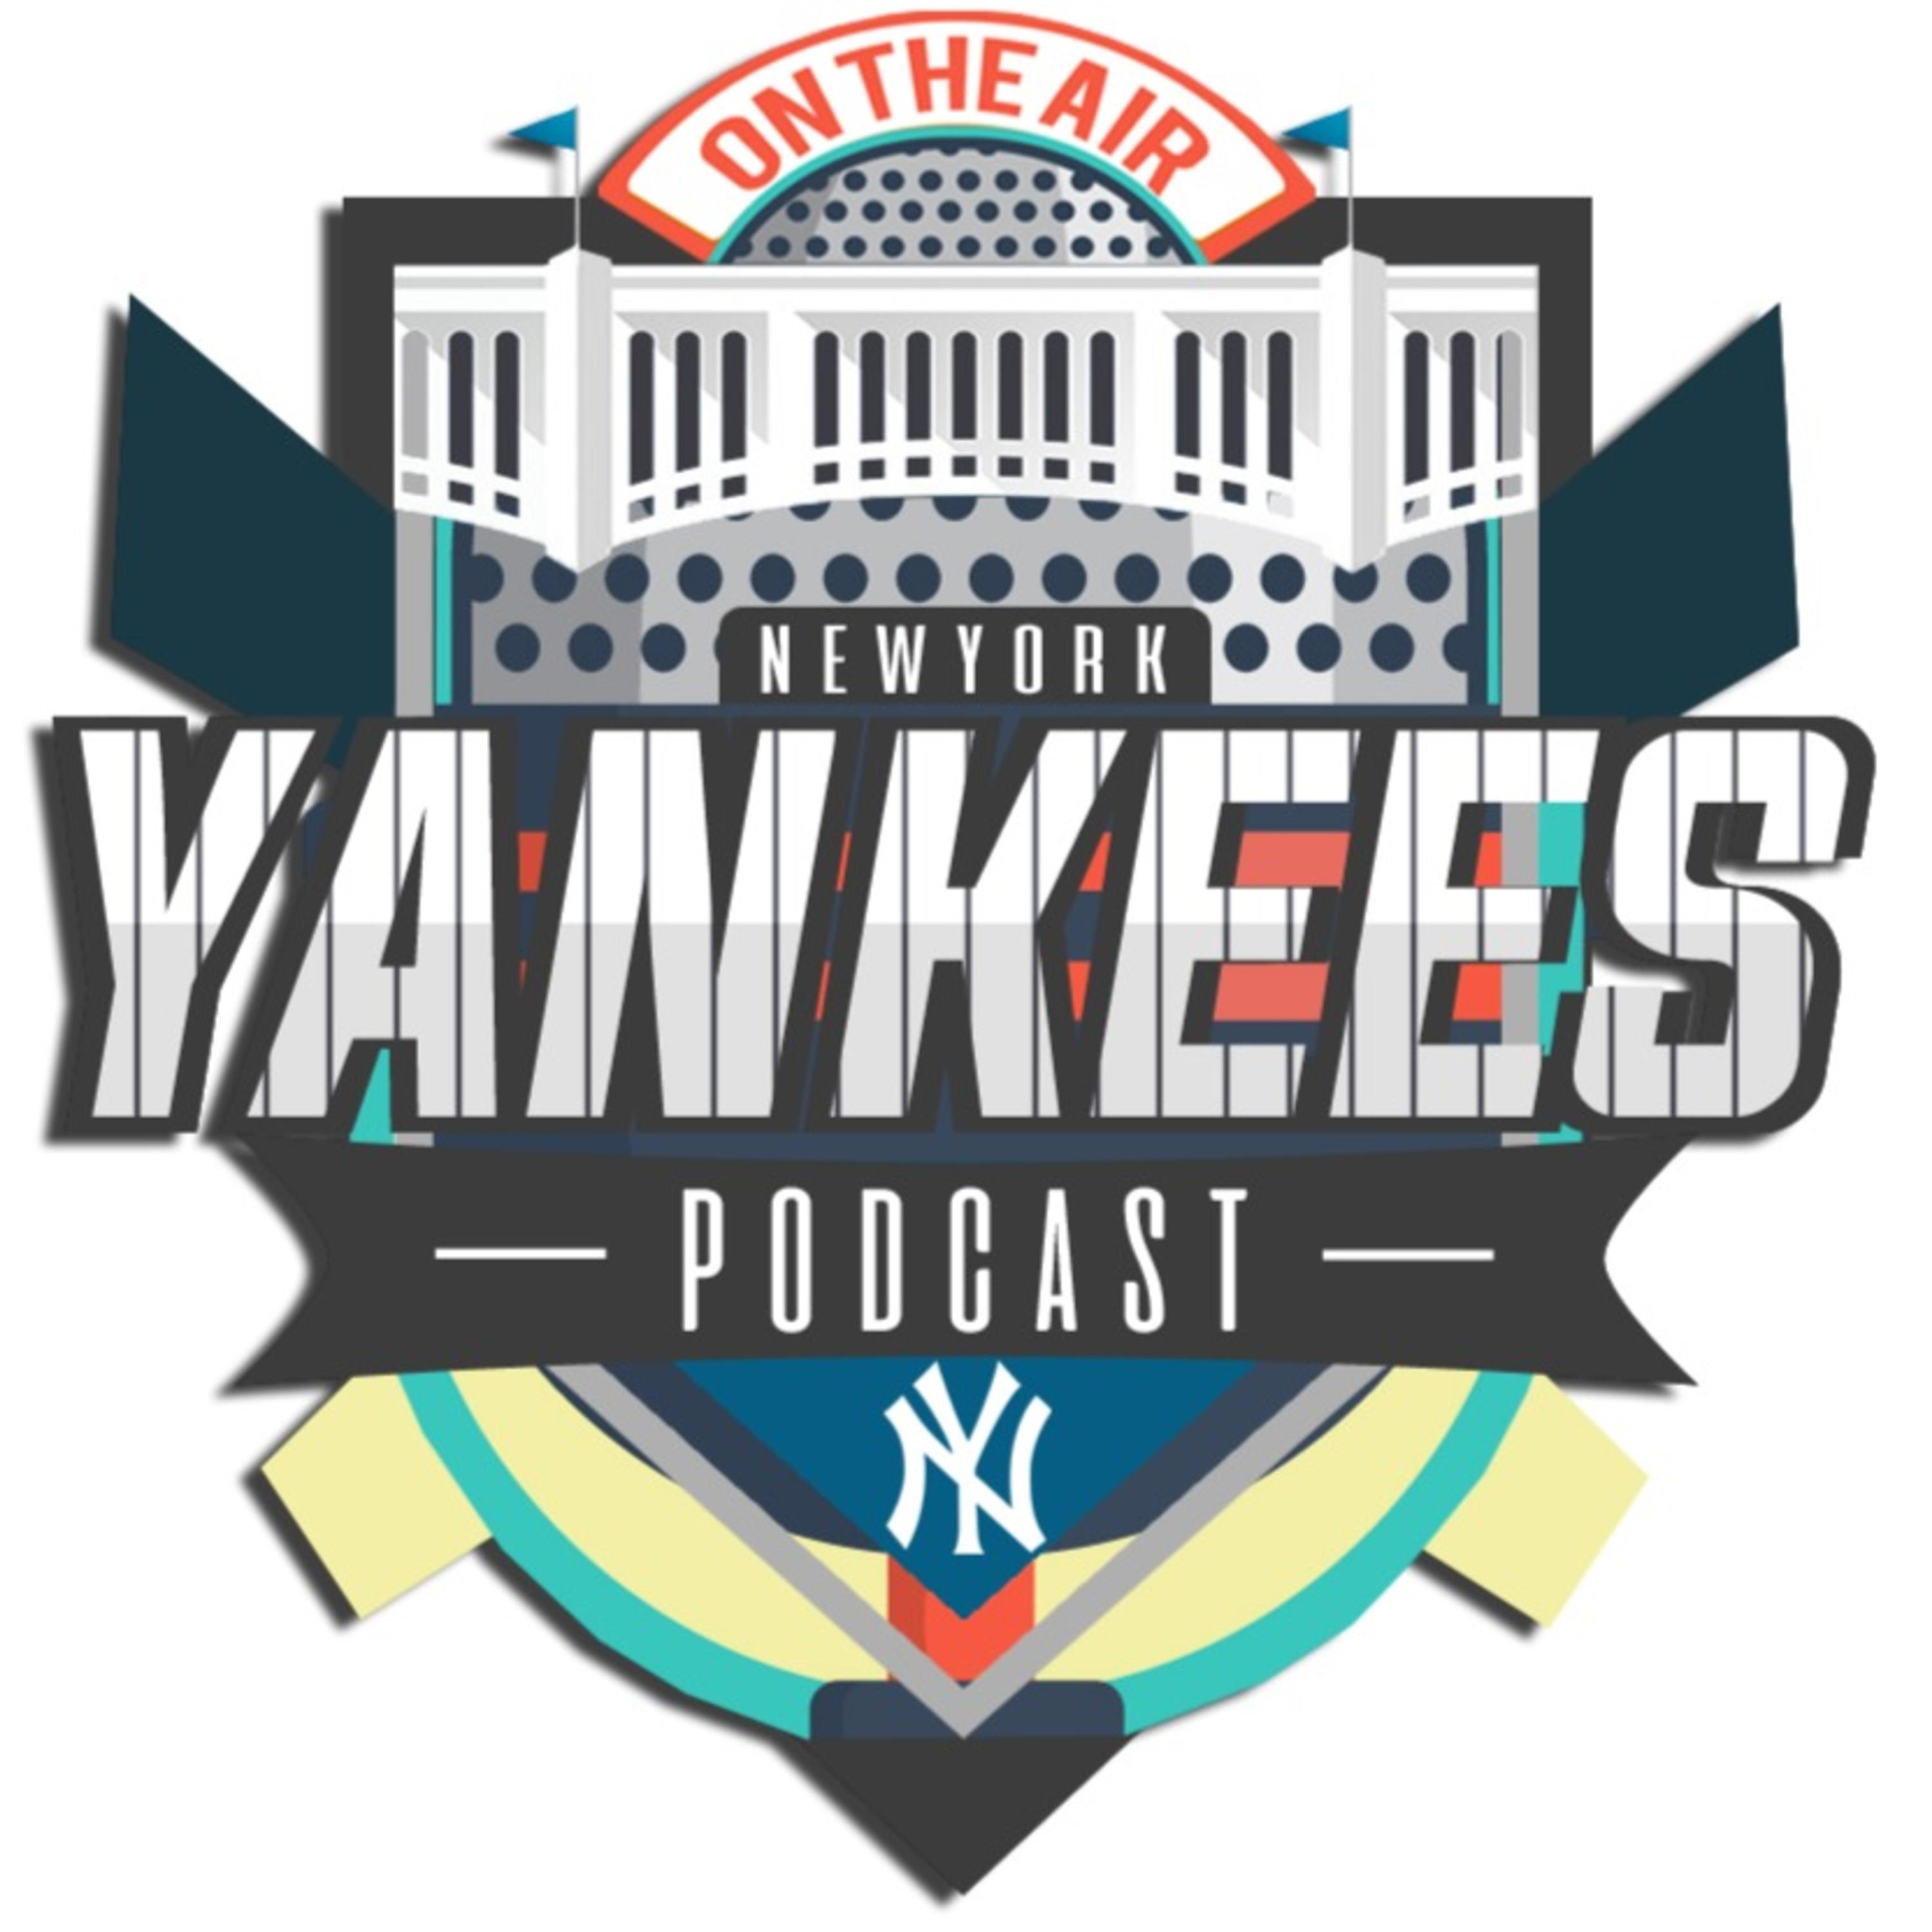 New York Yankees Hungary Podcast - Bé x DS! x Mike - Episode 16